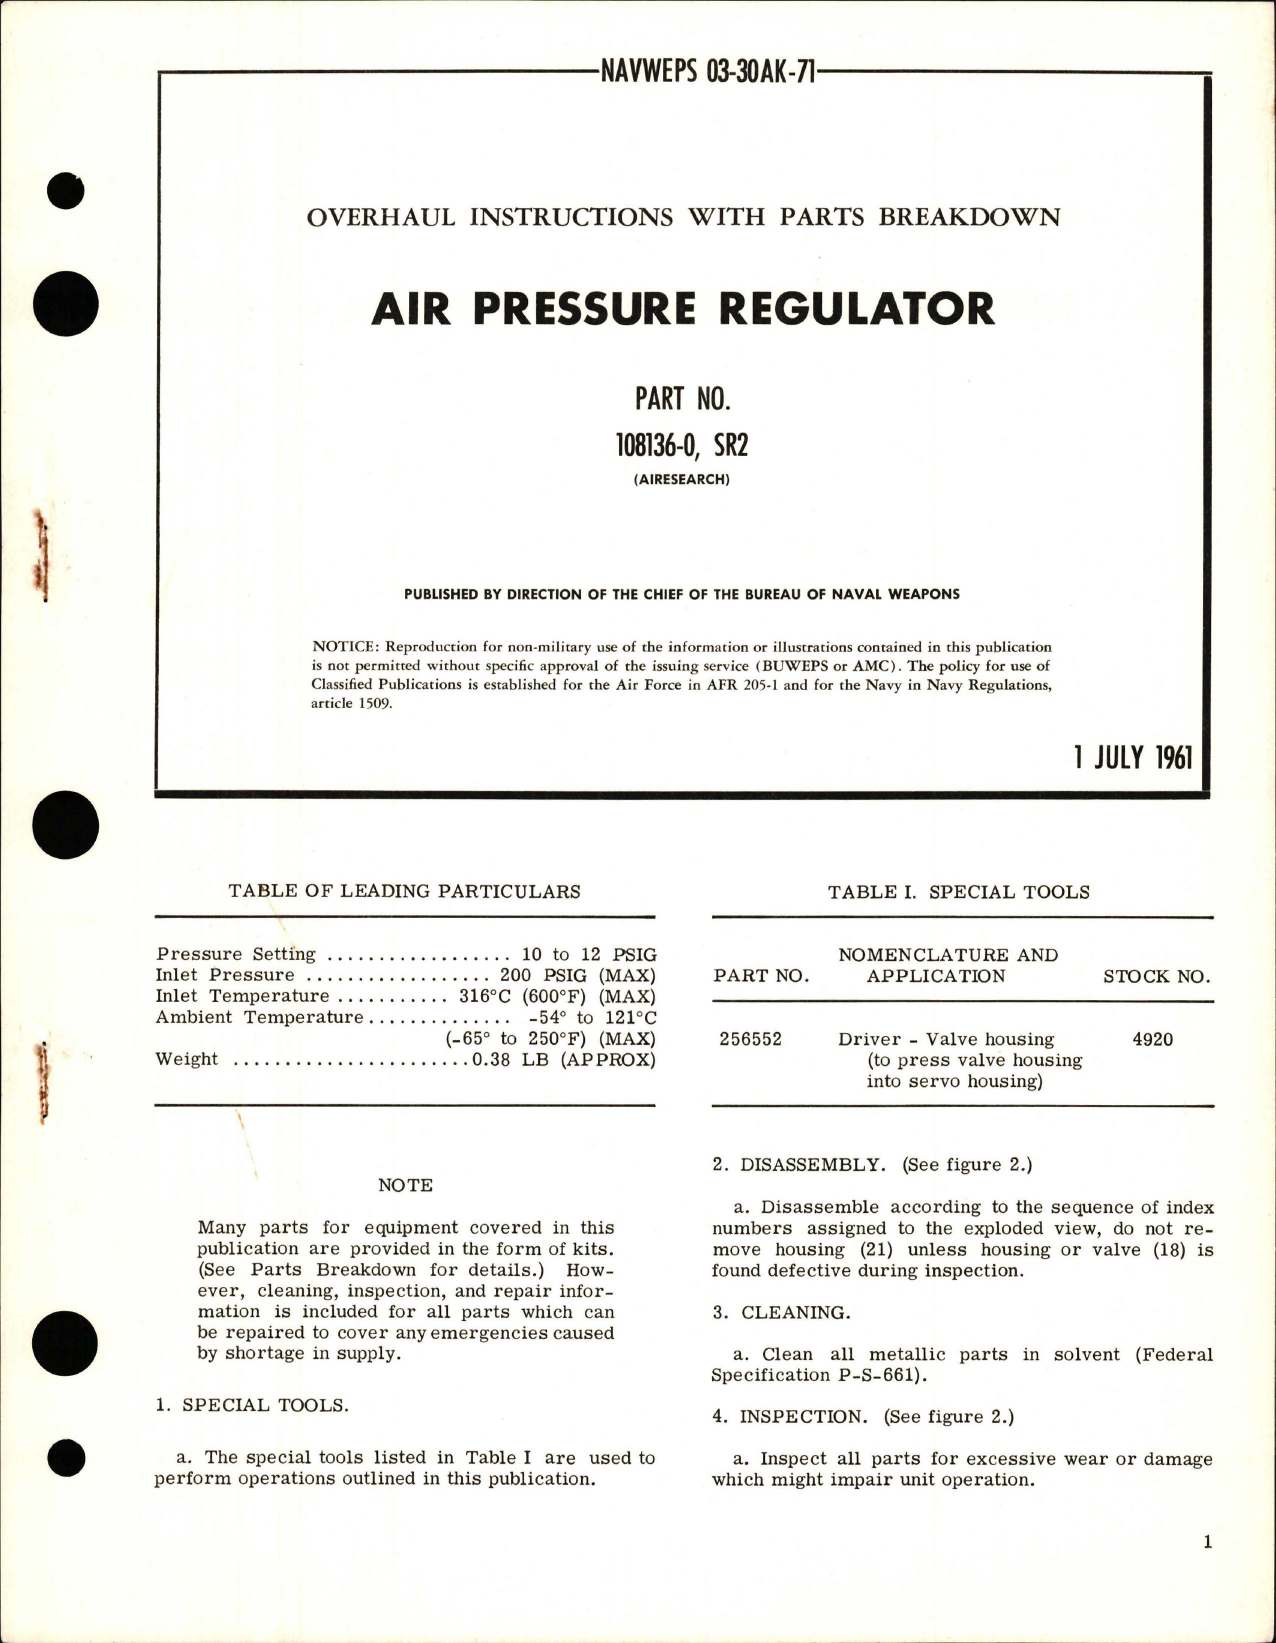 Sample page 1 from AirCorps Library document: Overhaul Instructions with Parts Breakdown for Air Pressure Regulator - Parts 108136-0 SR2